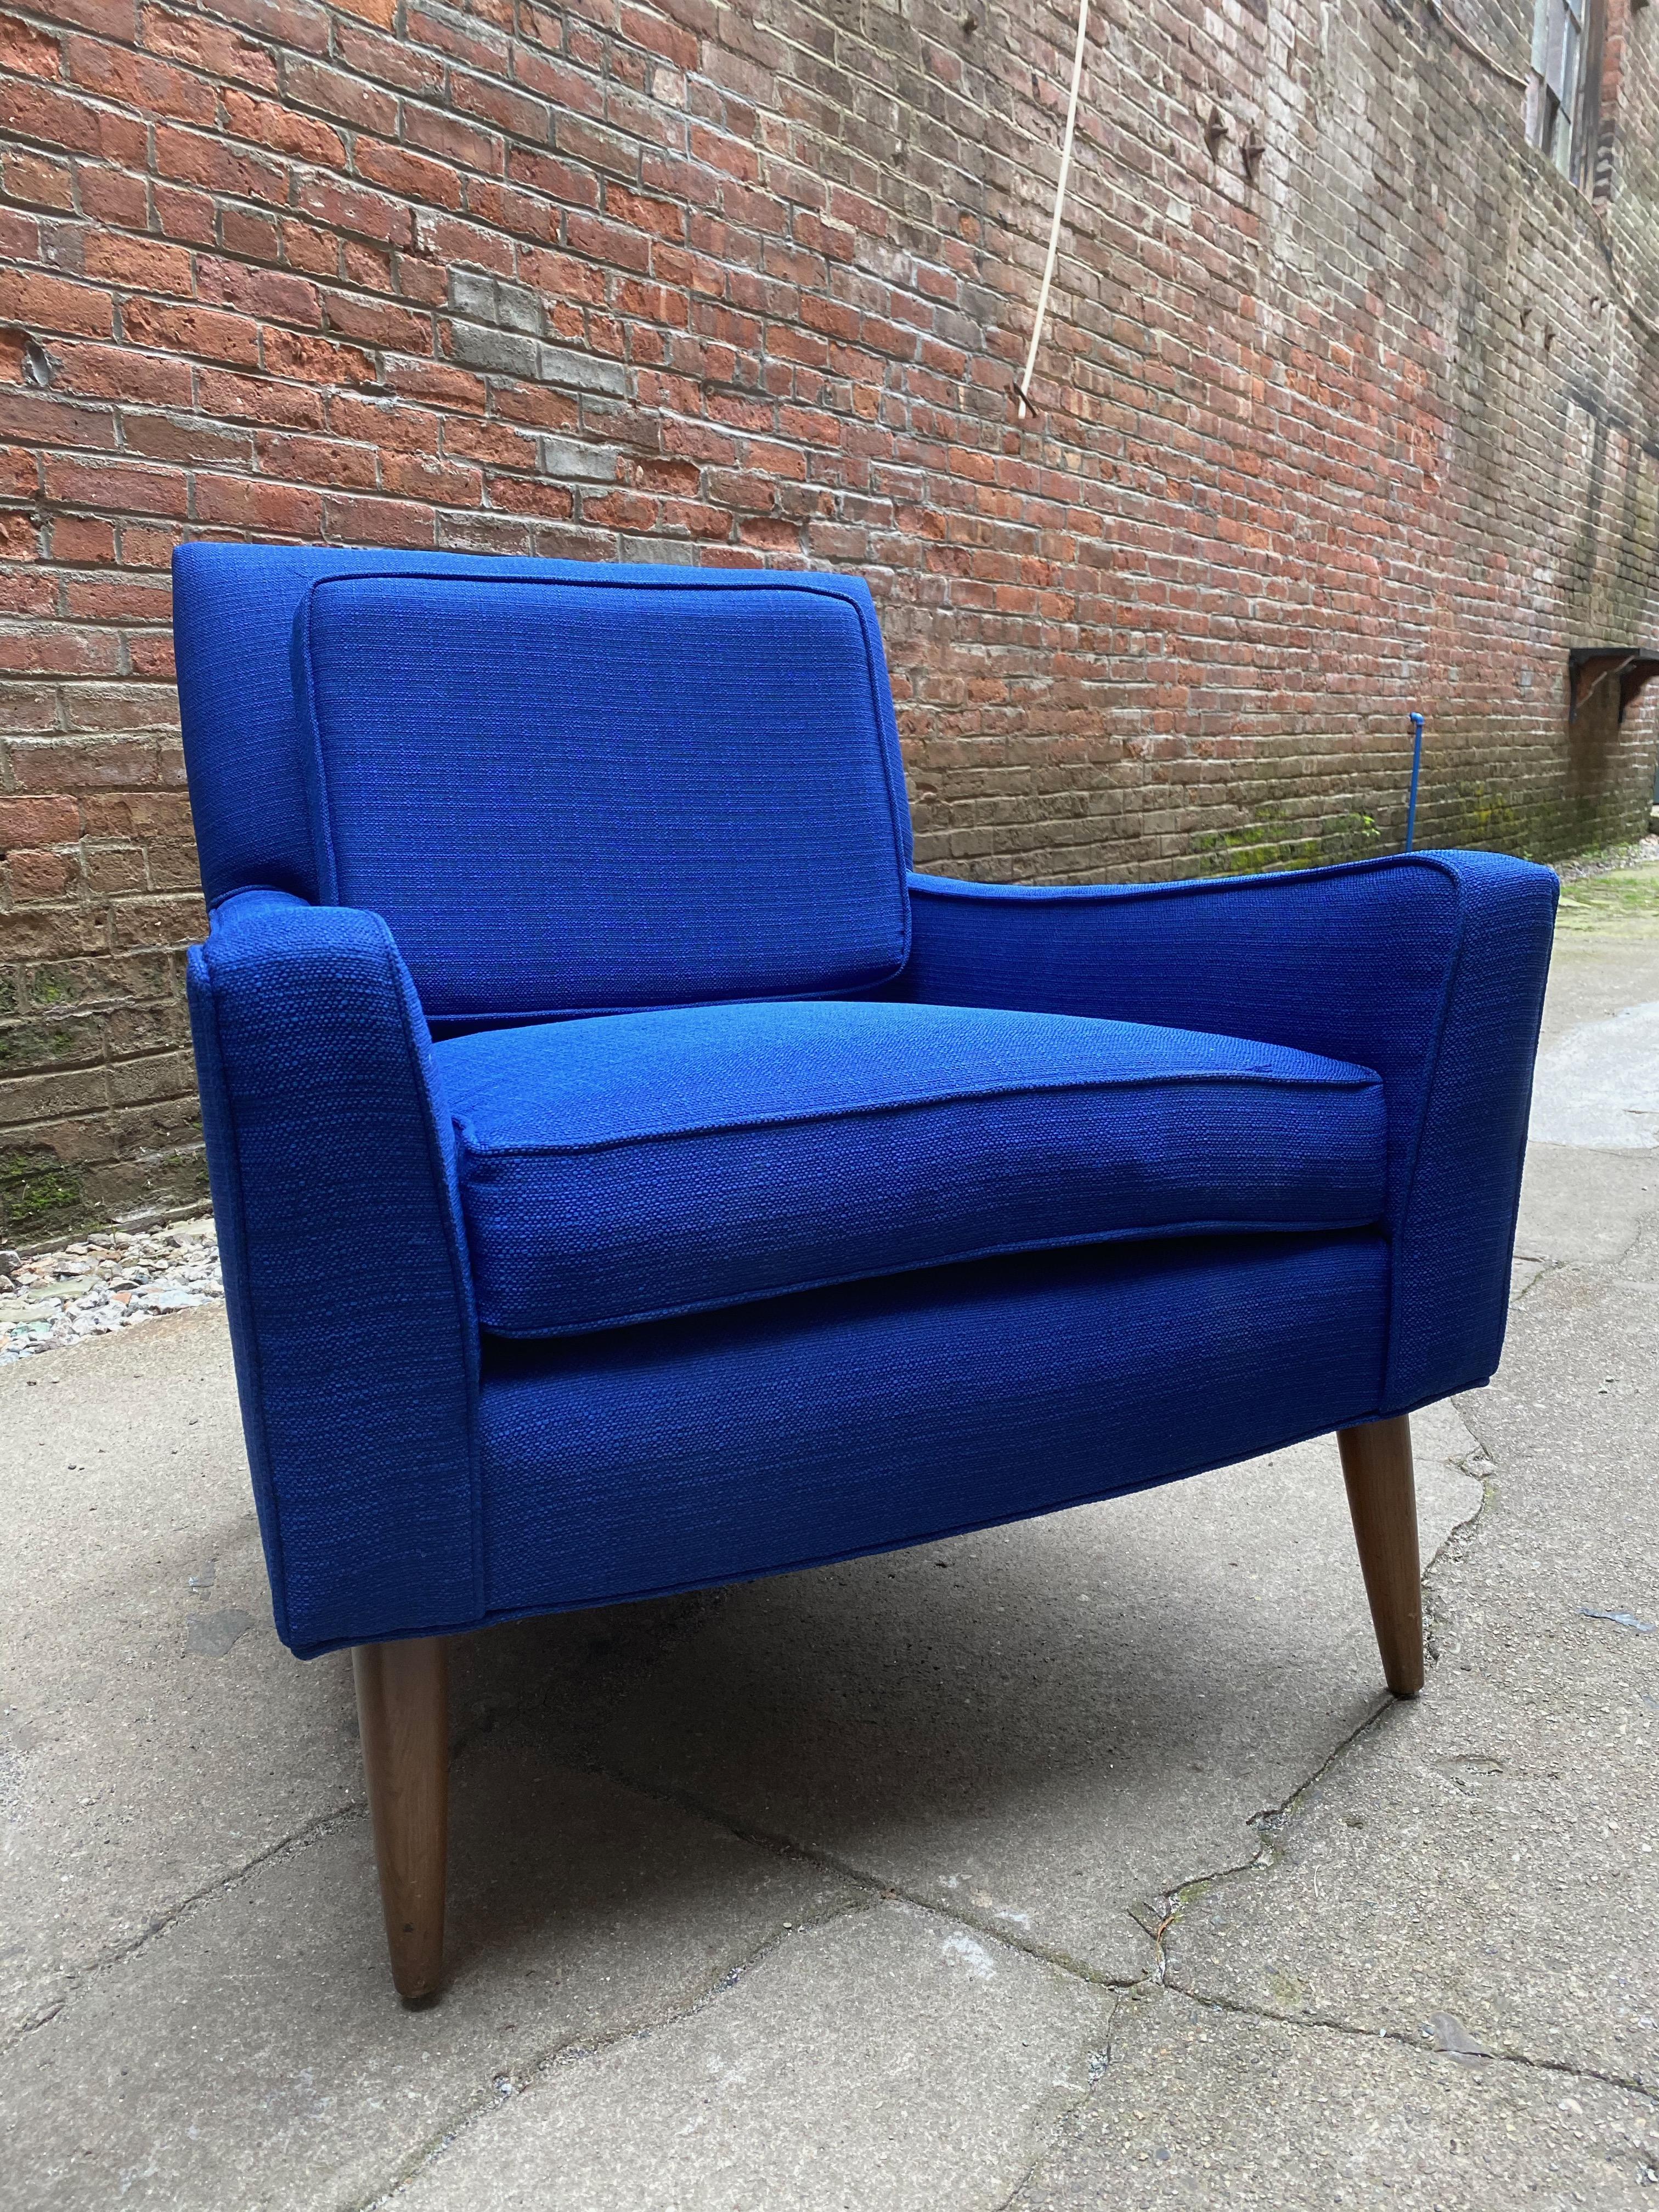 Pair of 1960s Lounge Chairs the Manner of Paul McCobb For Sale 4